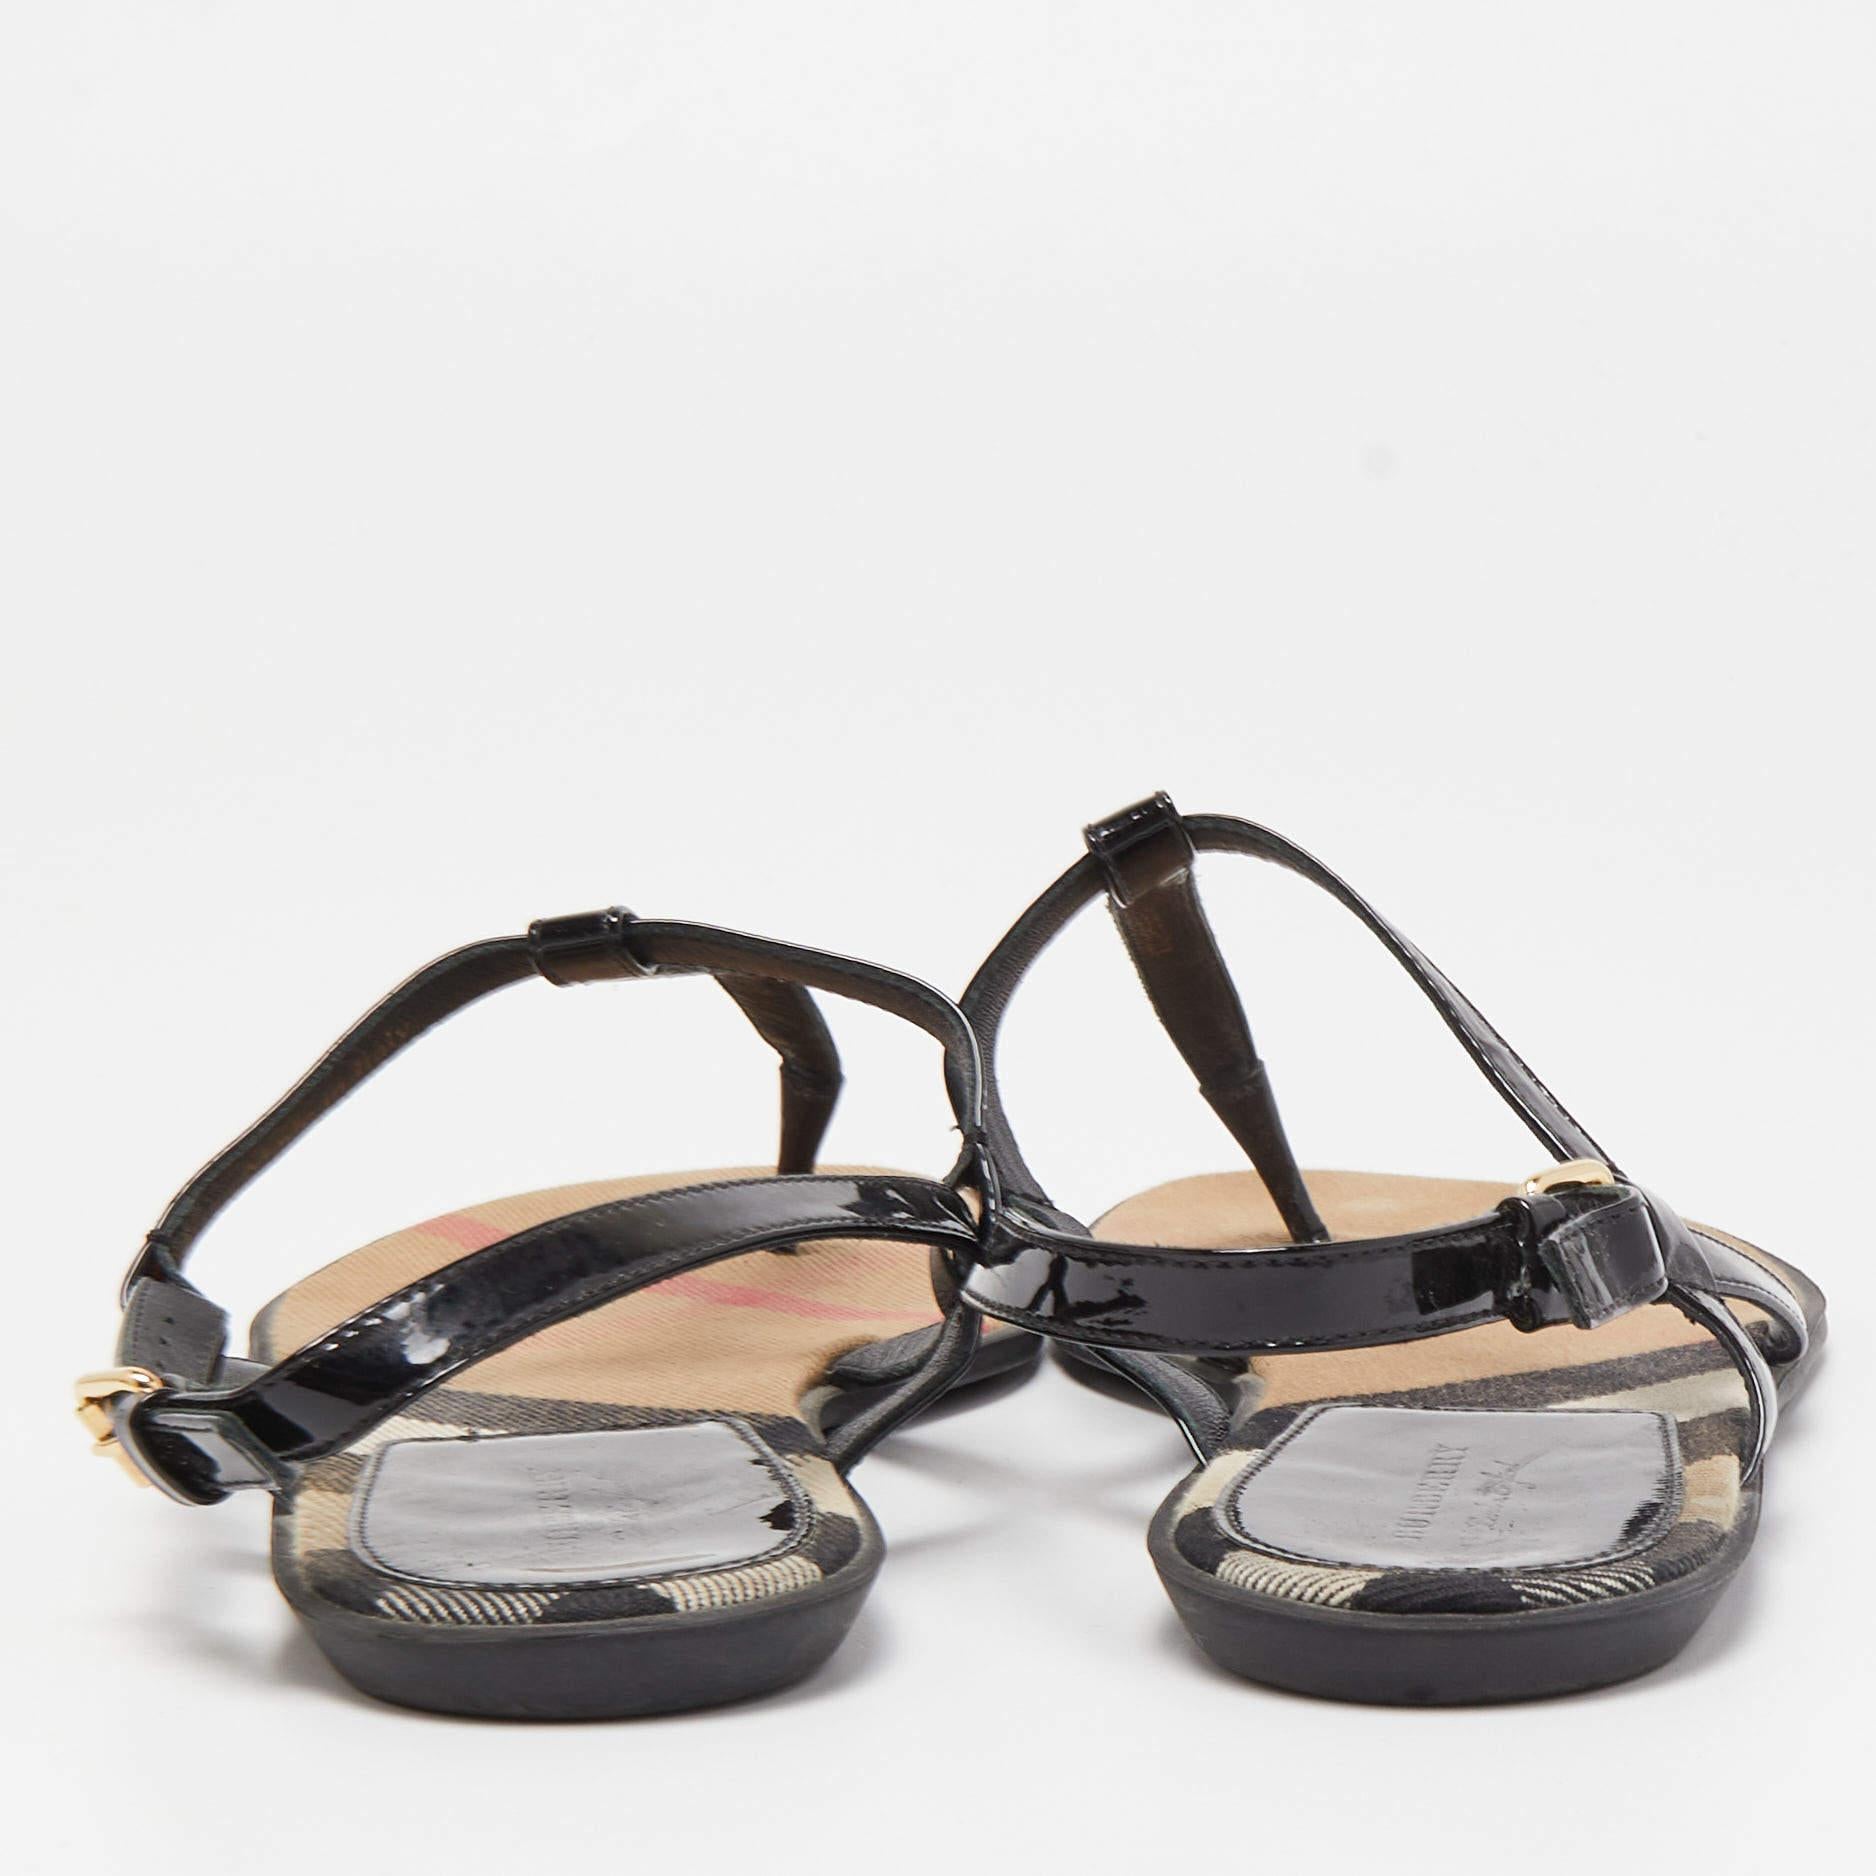 Burberry Black Patent Leather Thong Flat Sandals Size 36 3